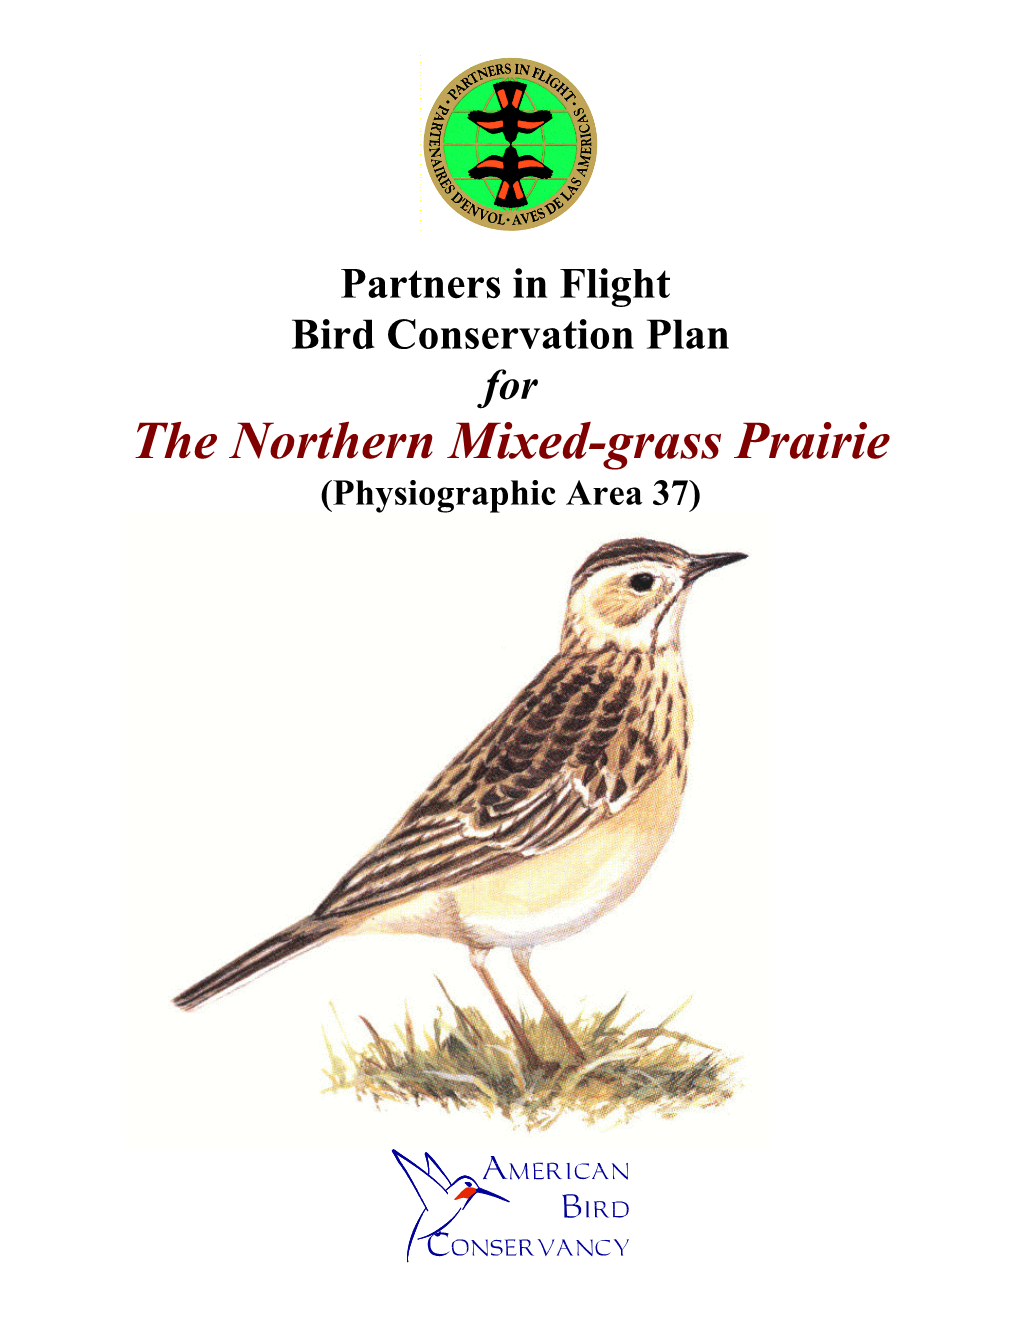 The Northern Mixed-Grass Prairie (Physiographic Area 37) Partners in Flight Bird Conservation Plan for the Northern Mixed-Grass Prairie (Physiographic Area 37)